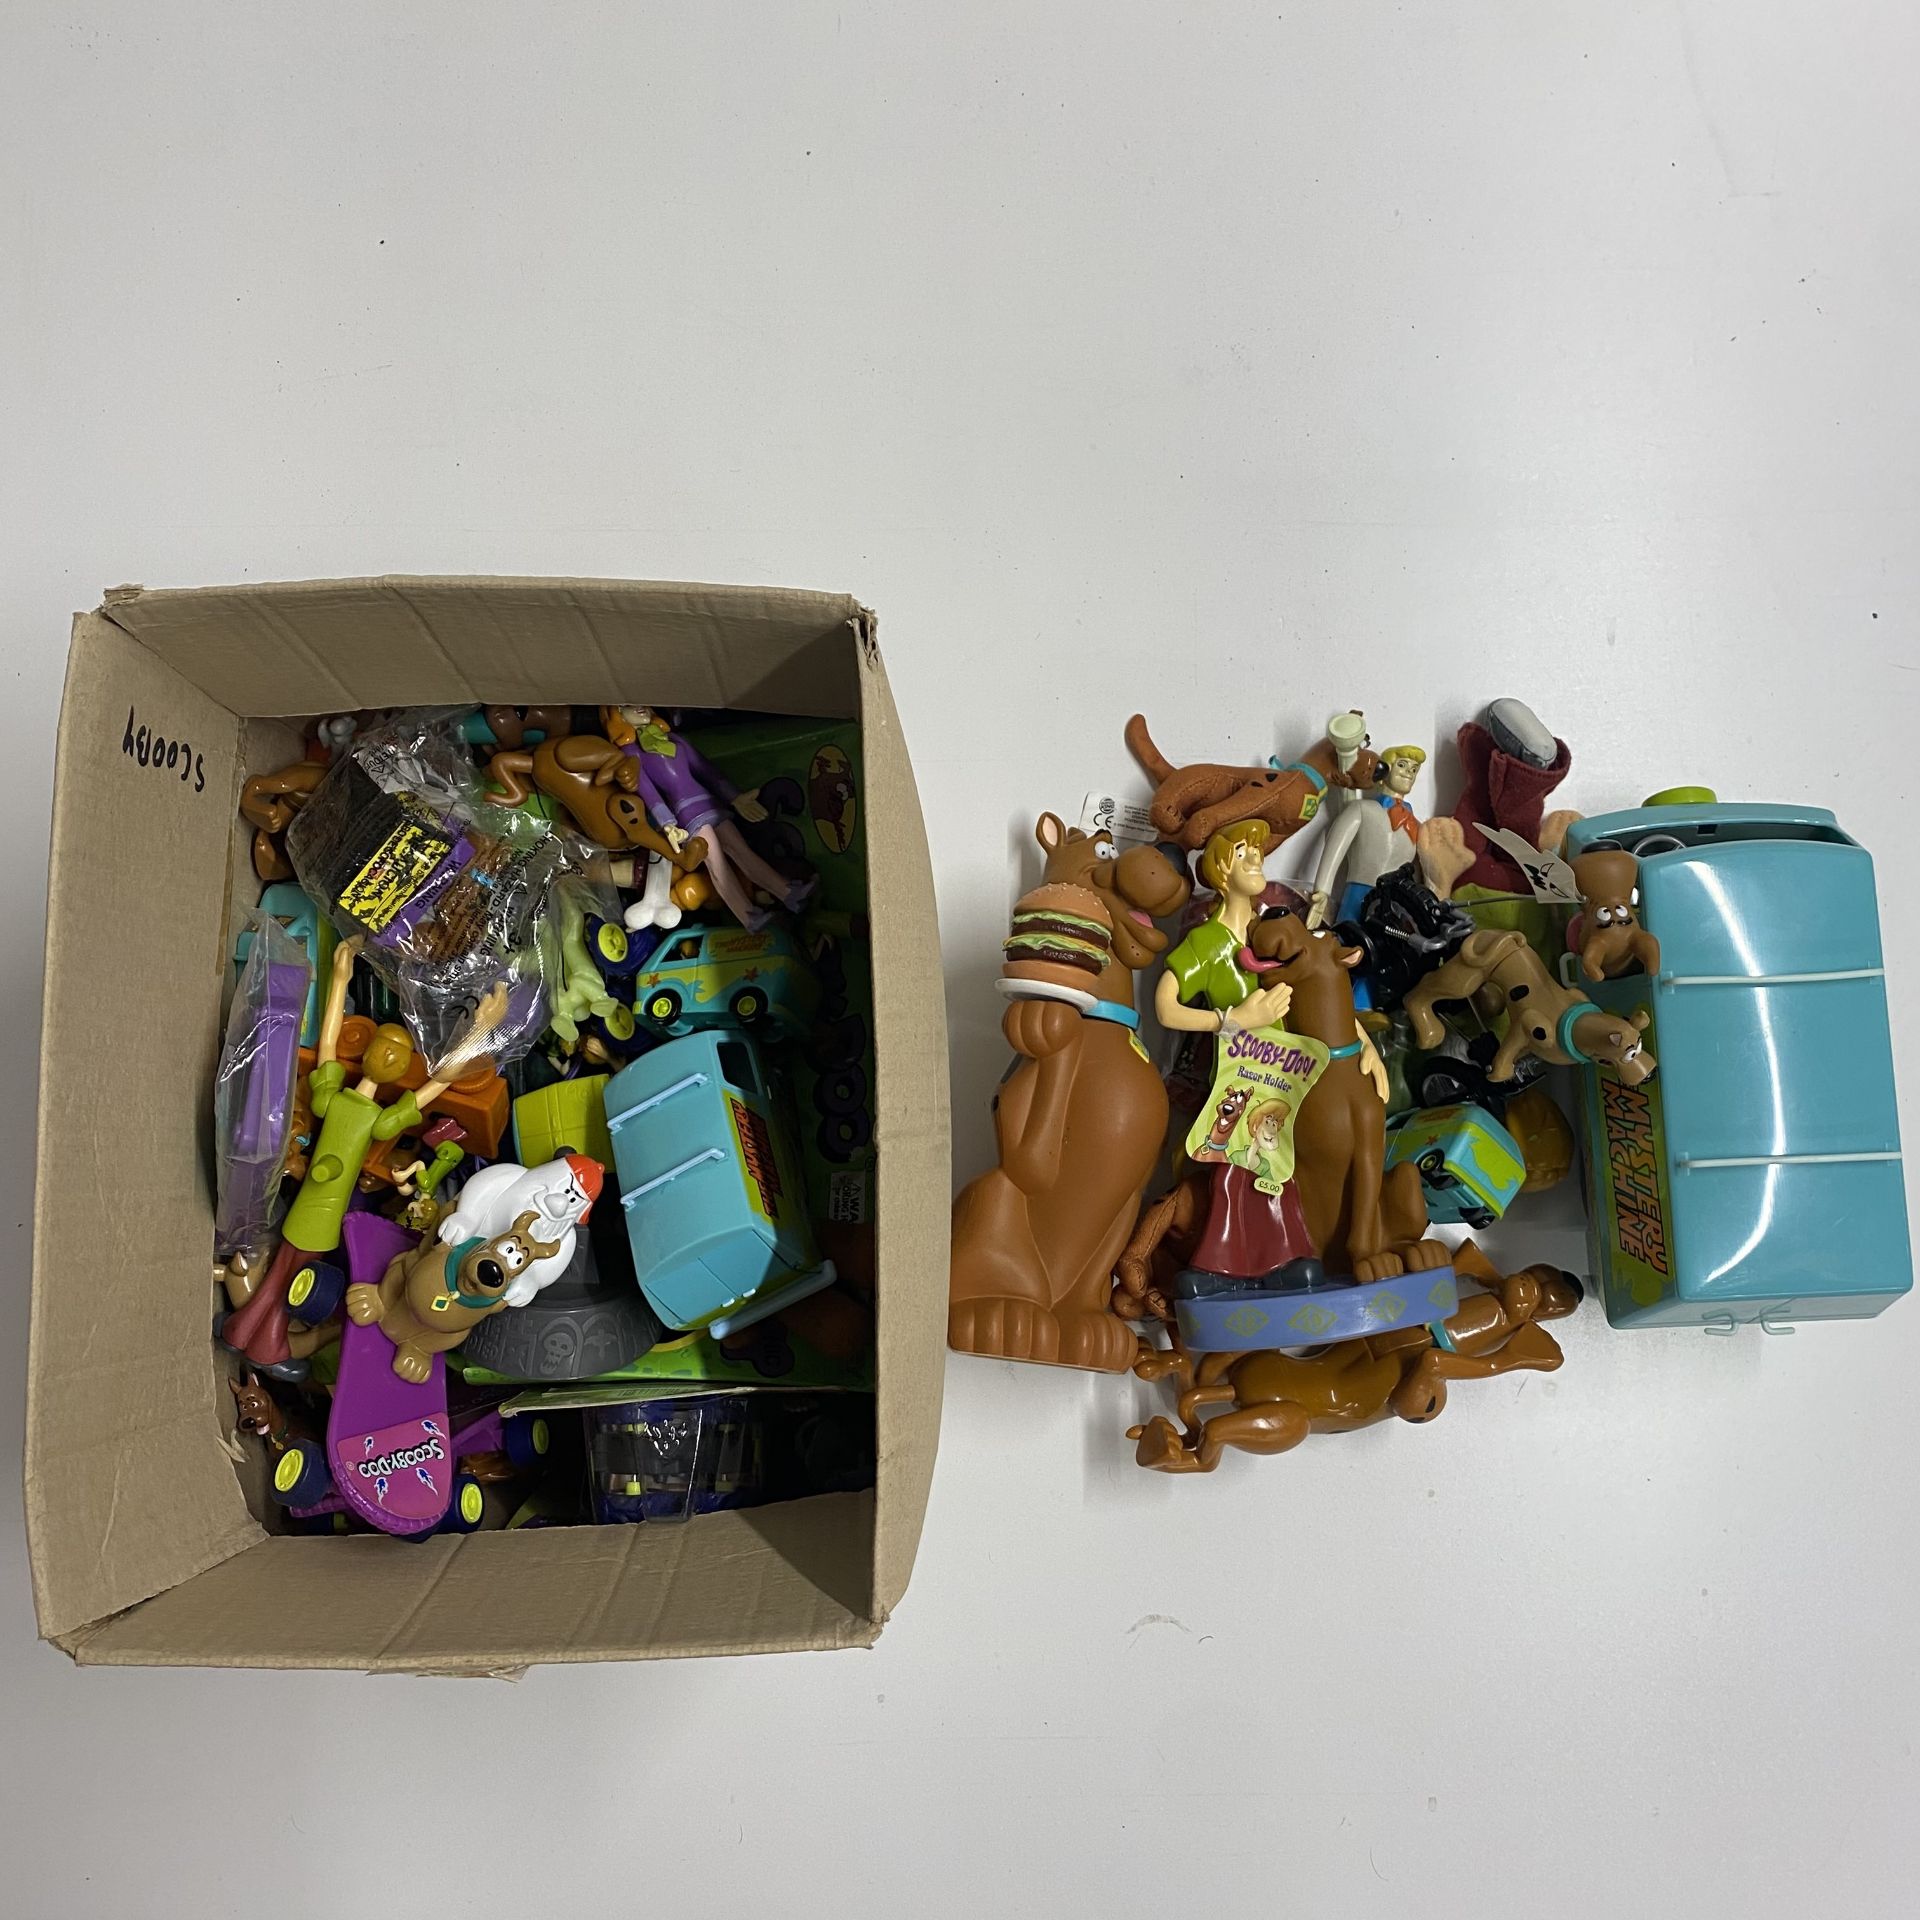 A collection of Scooby Doo toys and figures by Hanna Barbera.